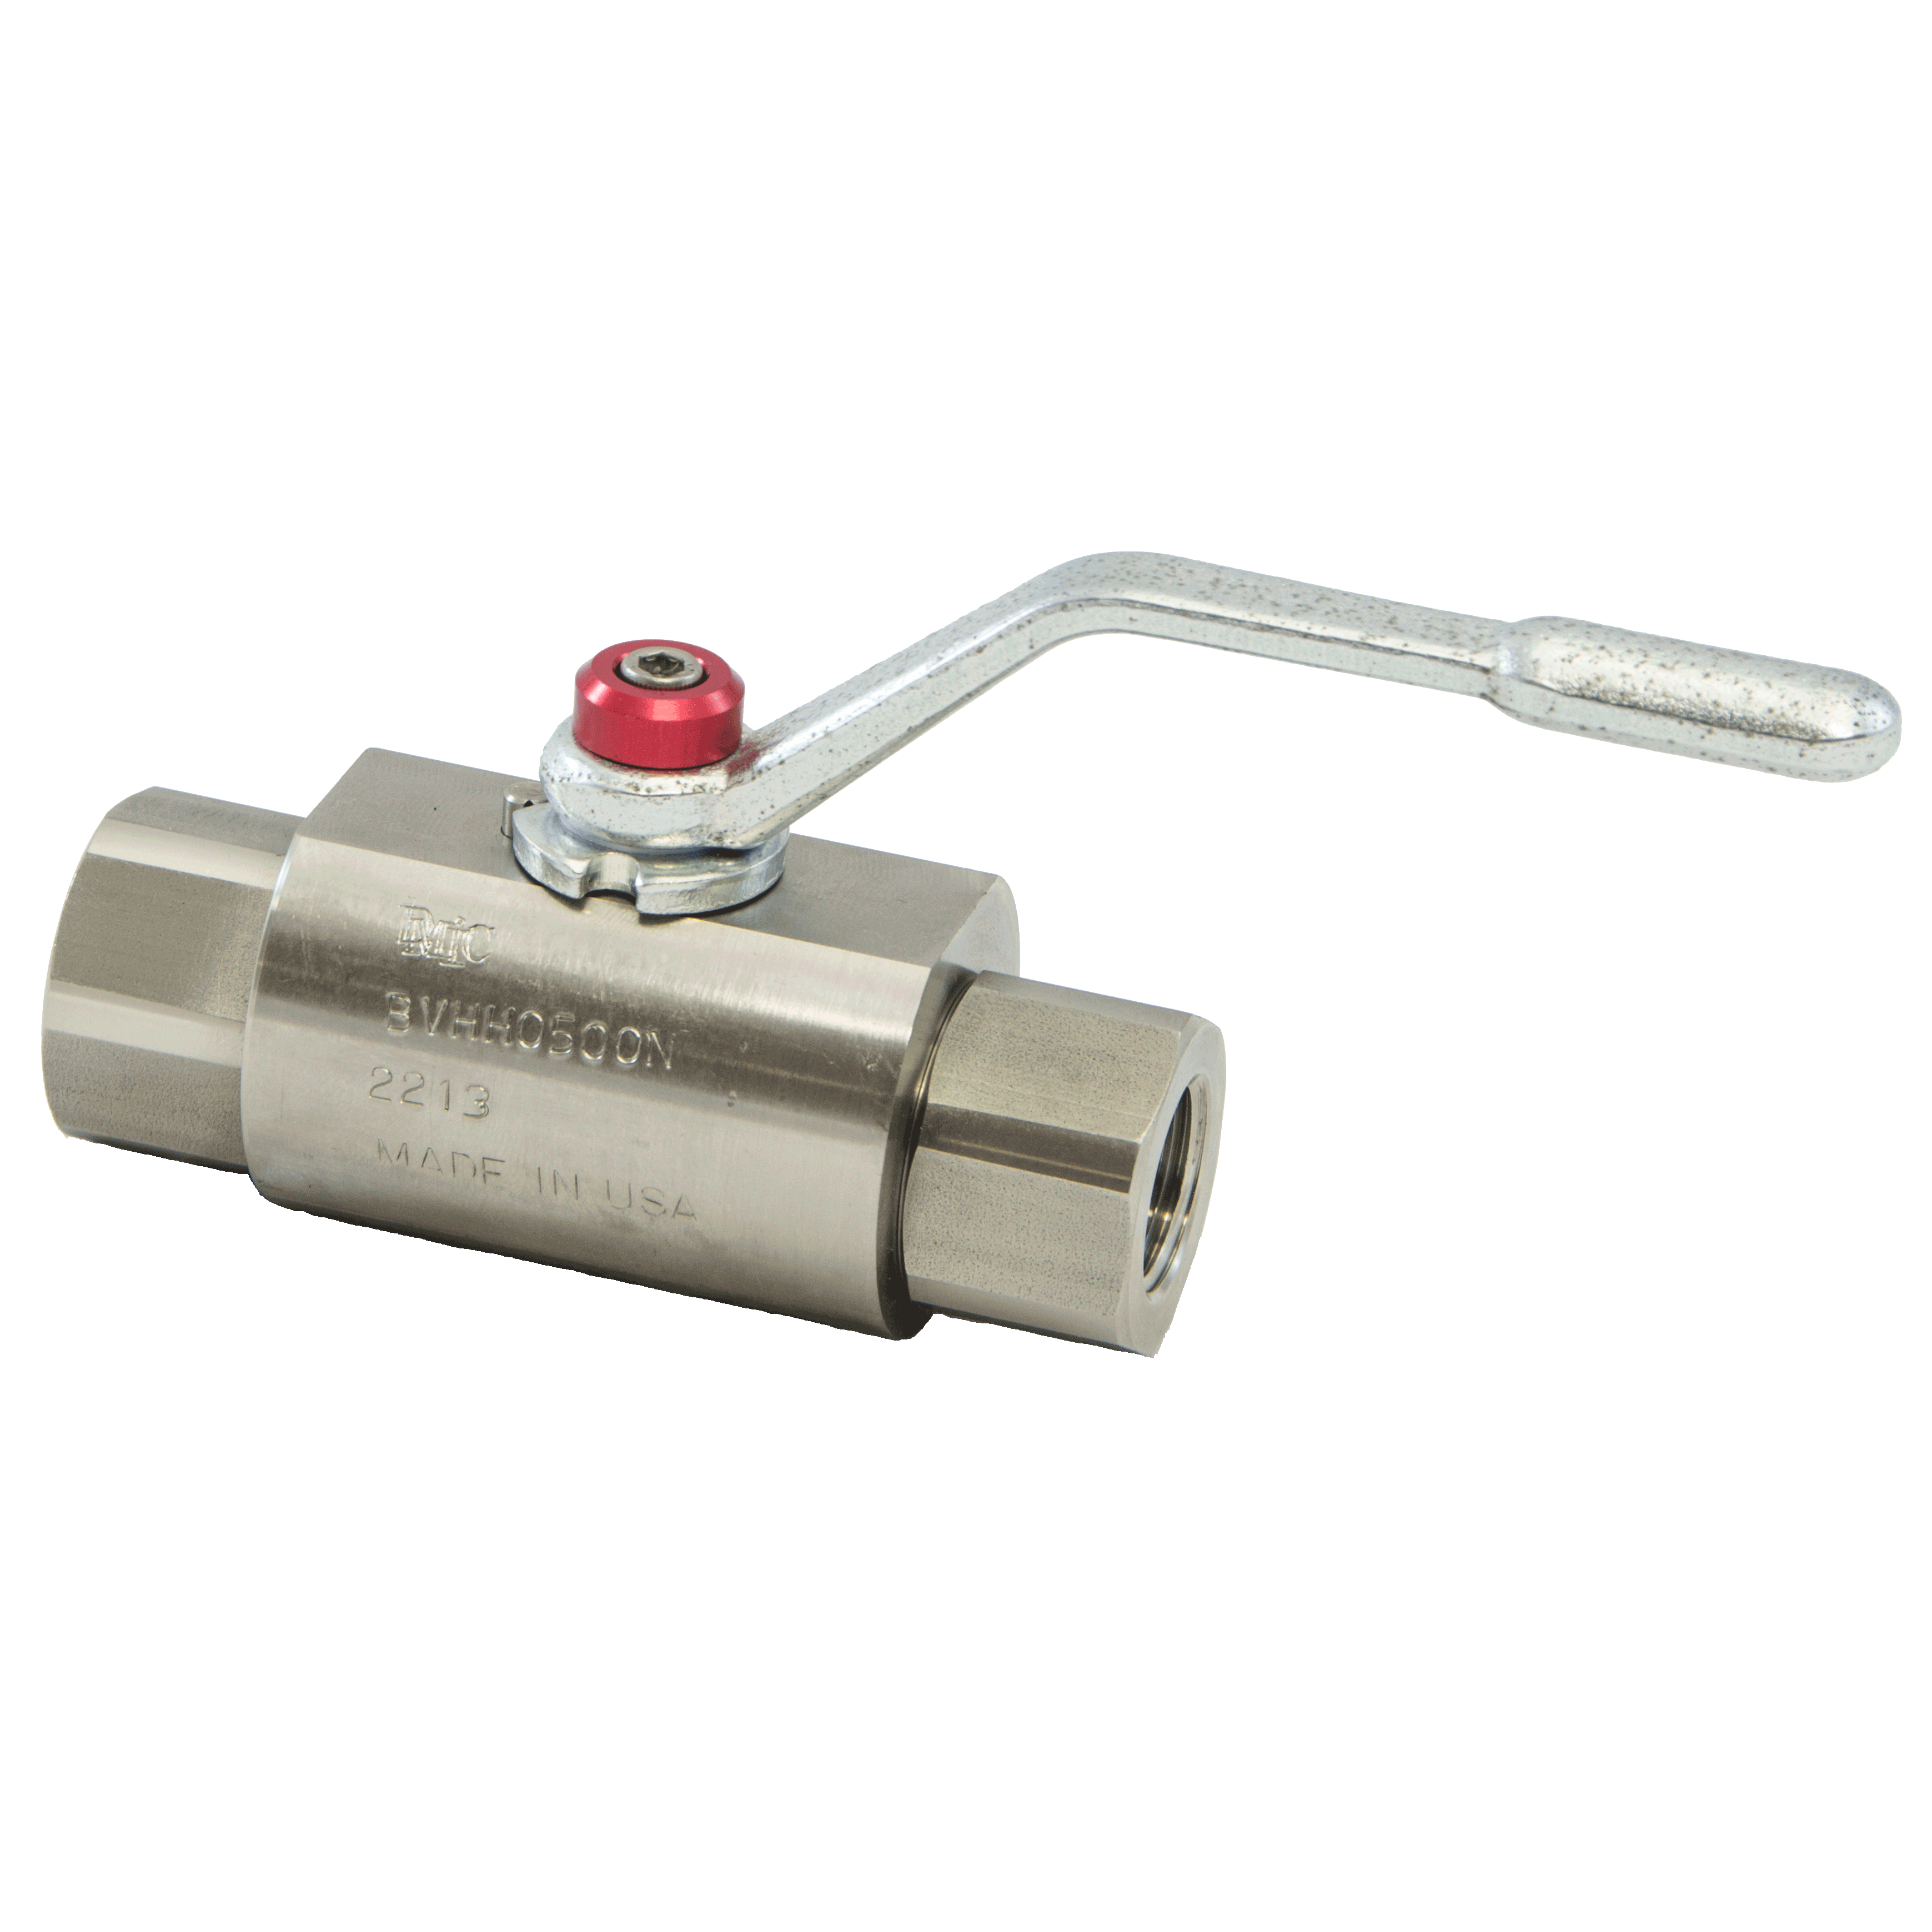 BVHH-1500S-1111 : DMIC Super High Pressure Ball Valve, #24 SAE (1.5), Carbon Steel, 10000psi, Two-Way